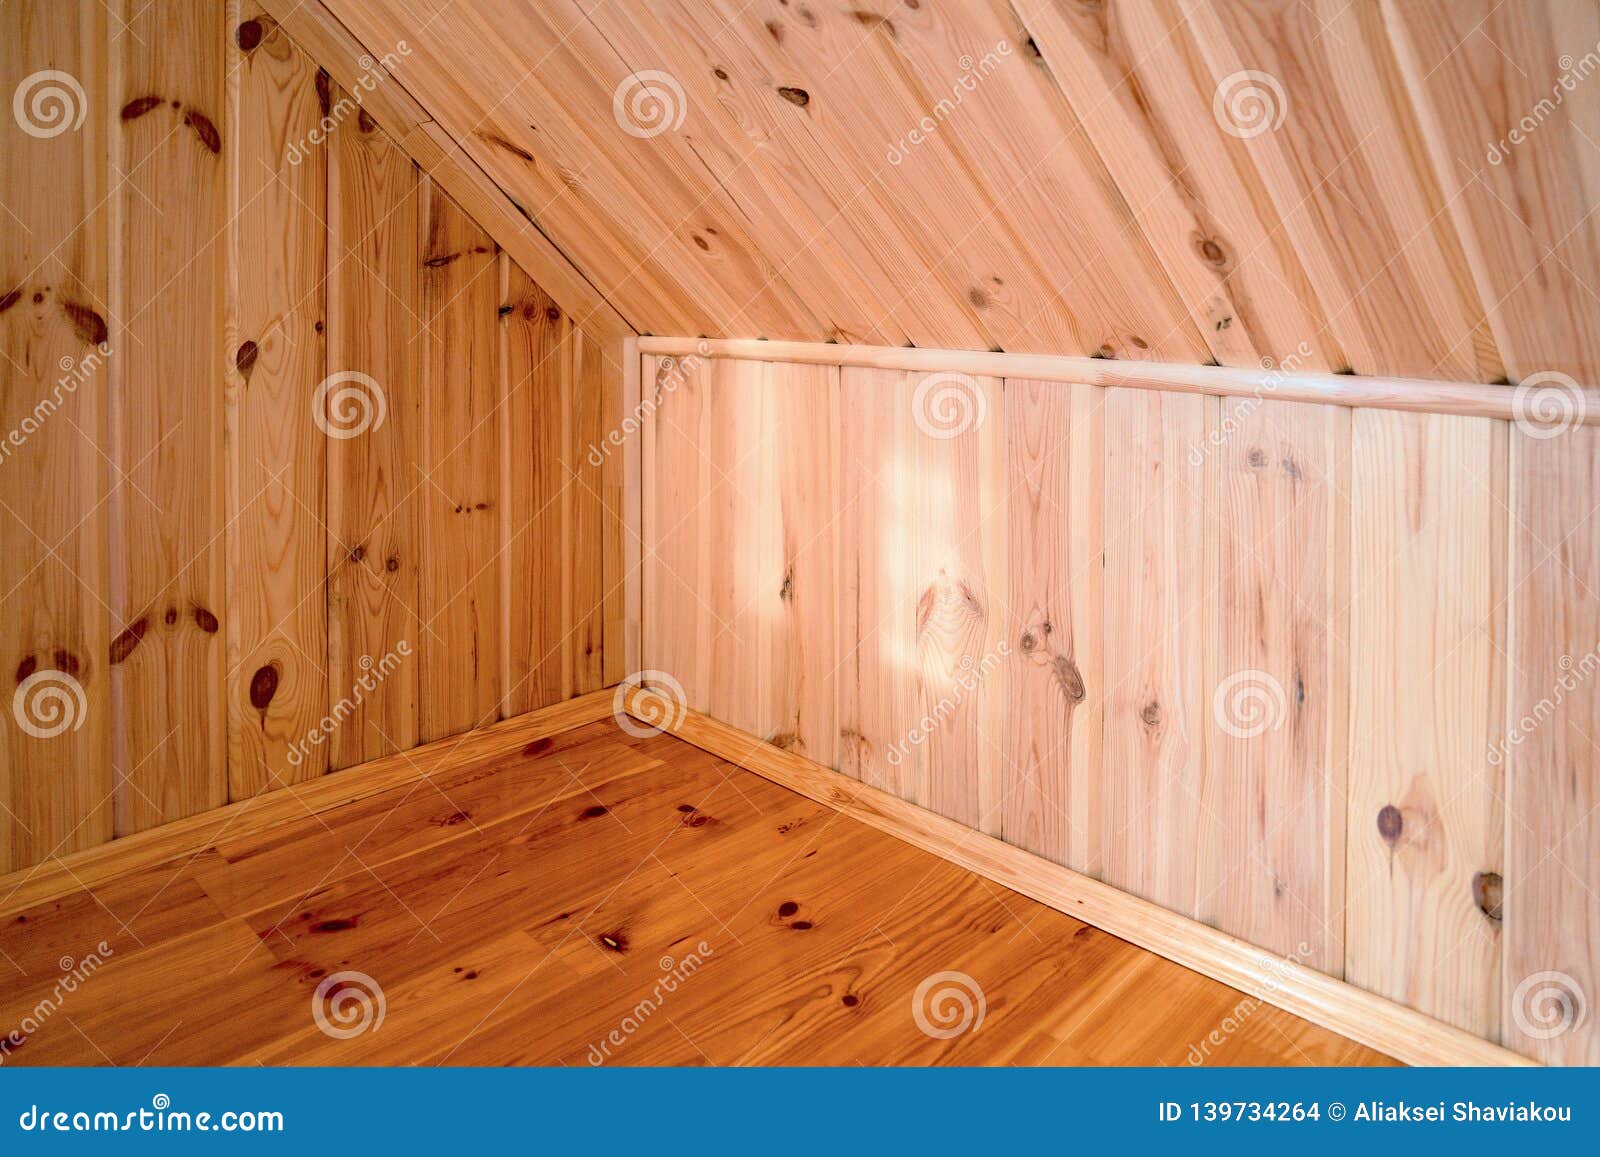 Rural House Room Corner Interior As An Example Of Carpentry